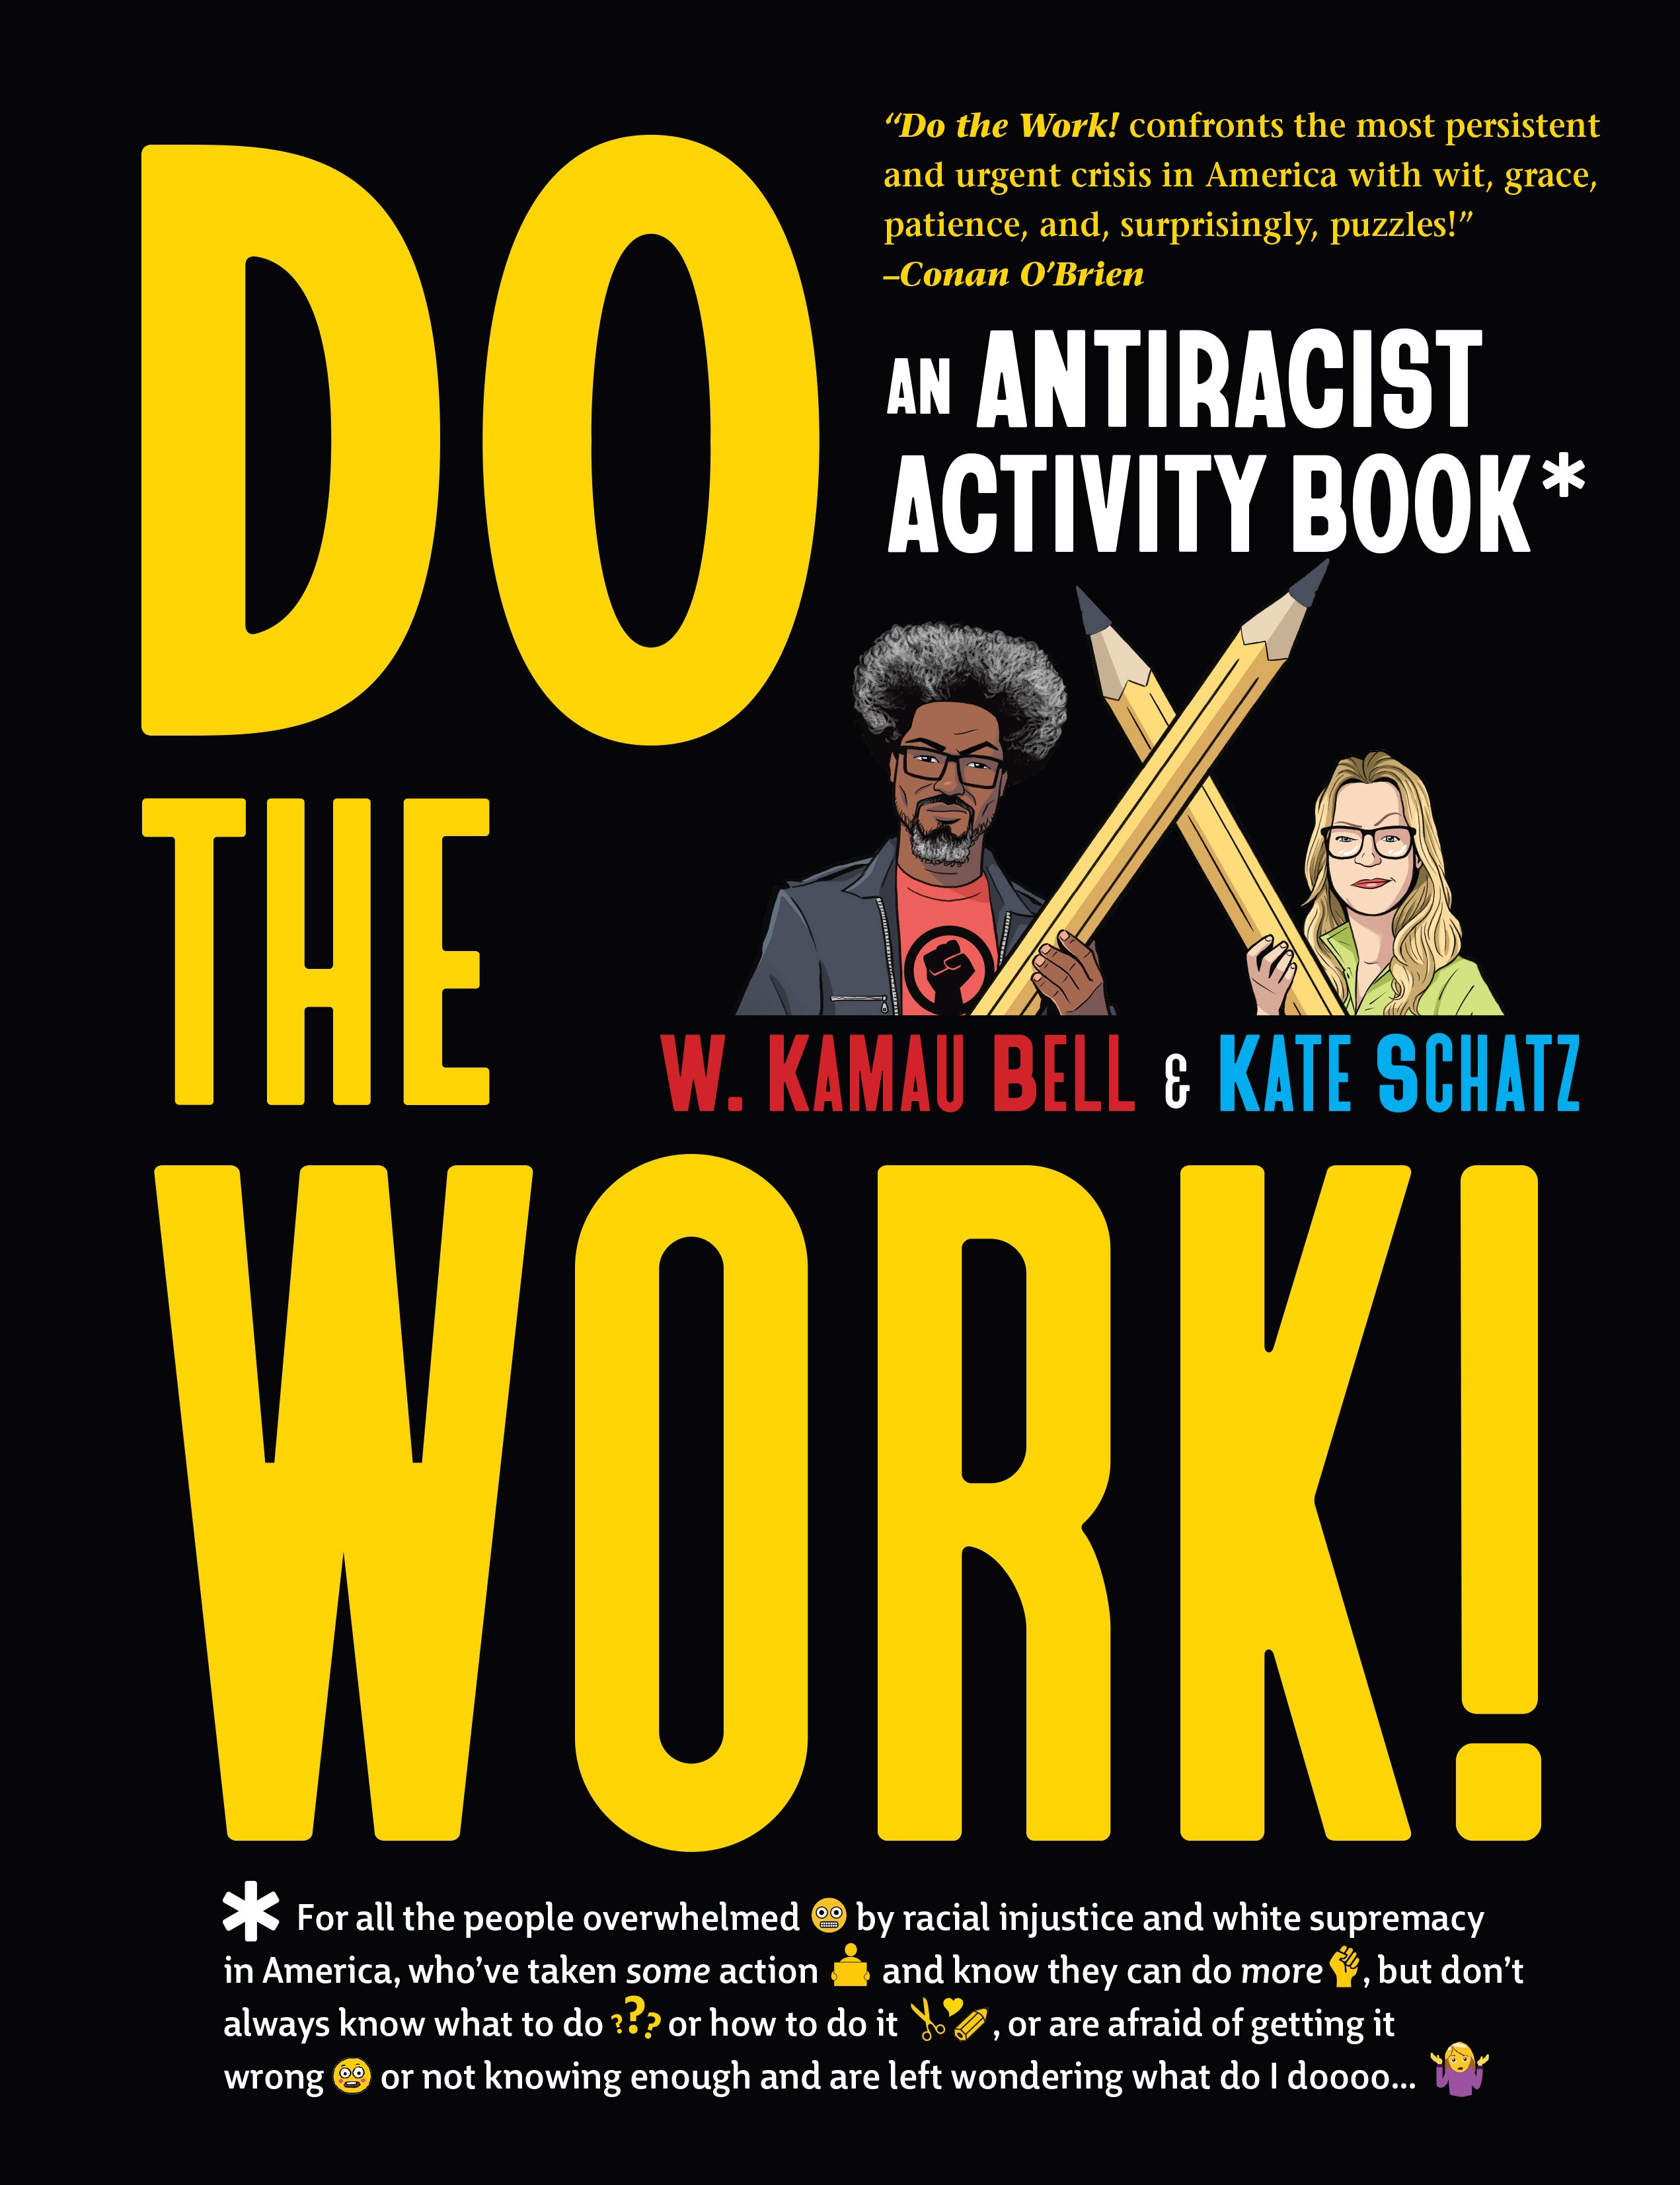 NDG Book Review: ‘Do the Work! An Antiracist Activity Book’